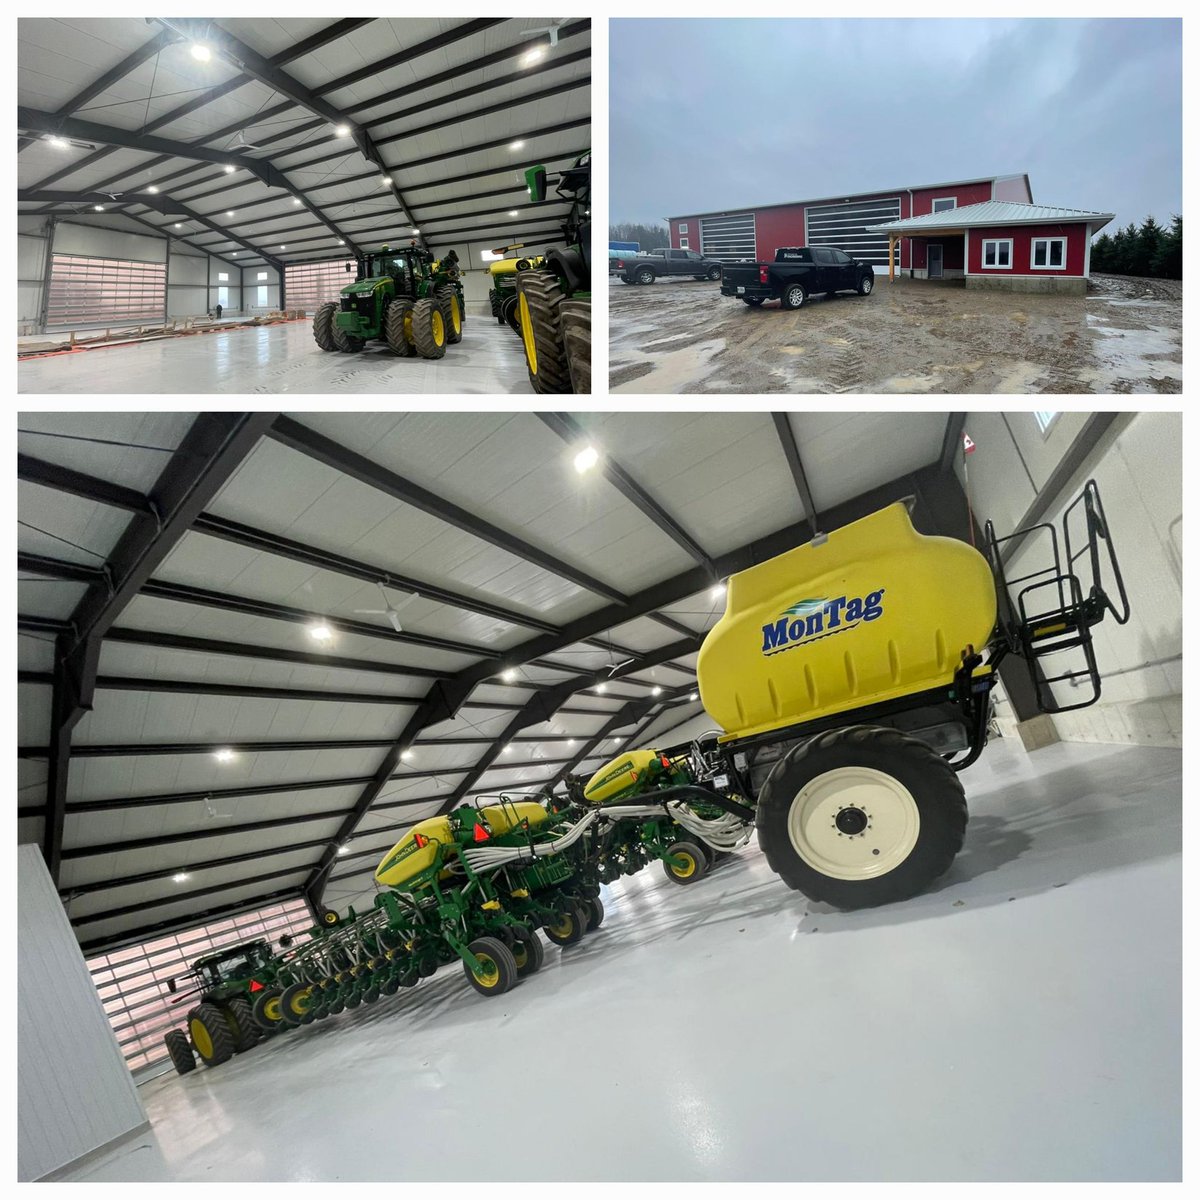 100' clearspan shop completed near fingal